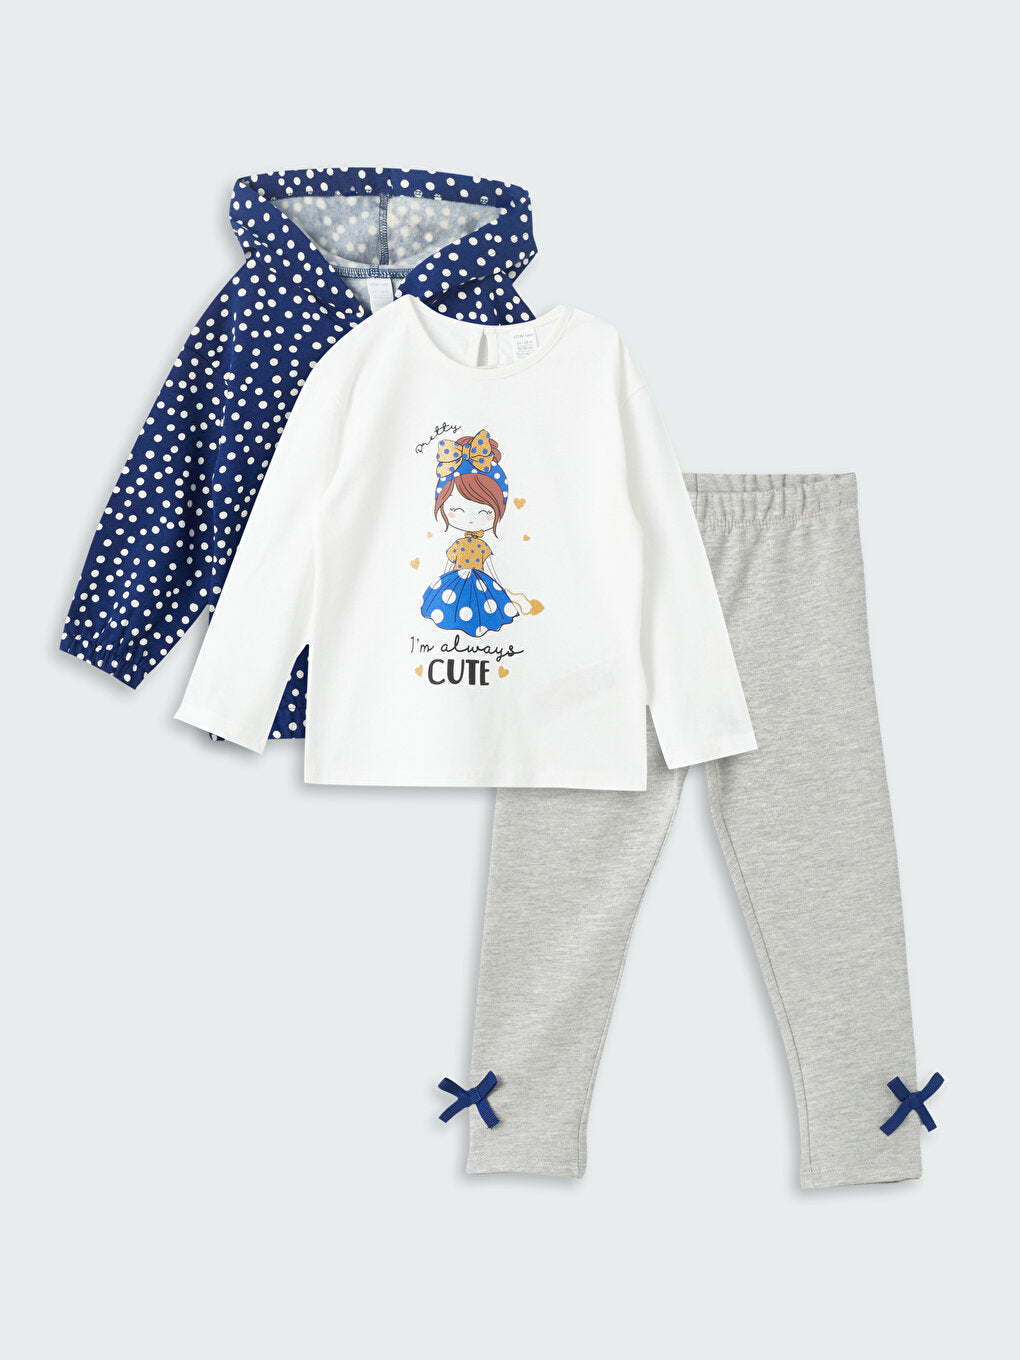 Crew Neck Printed Long Sleeve T-Shirt, Tights And Zippered Sweatshirt Baby Girl 3-Piece Set